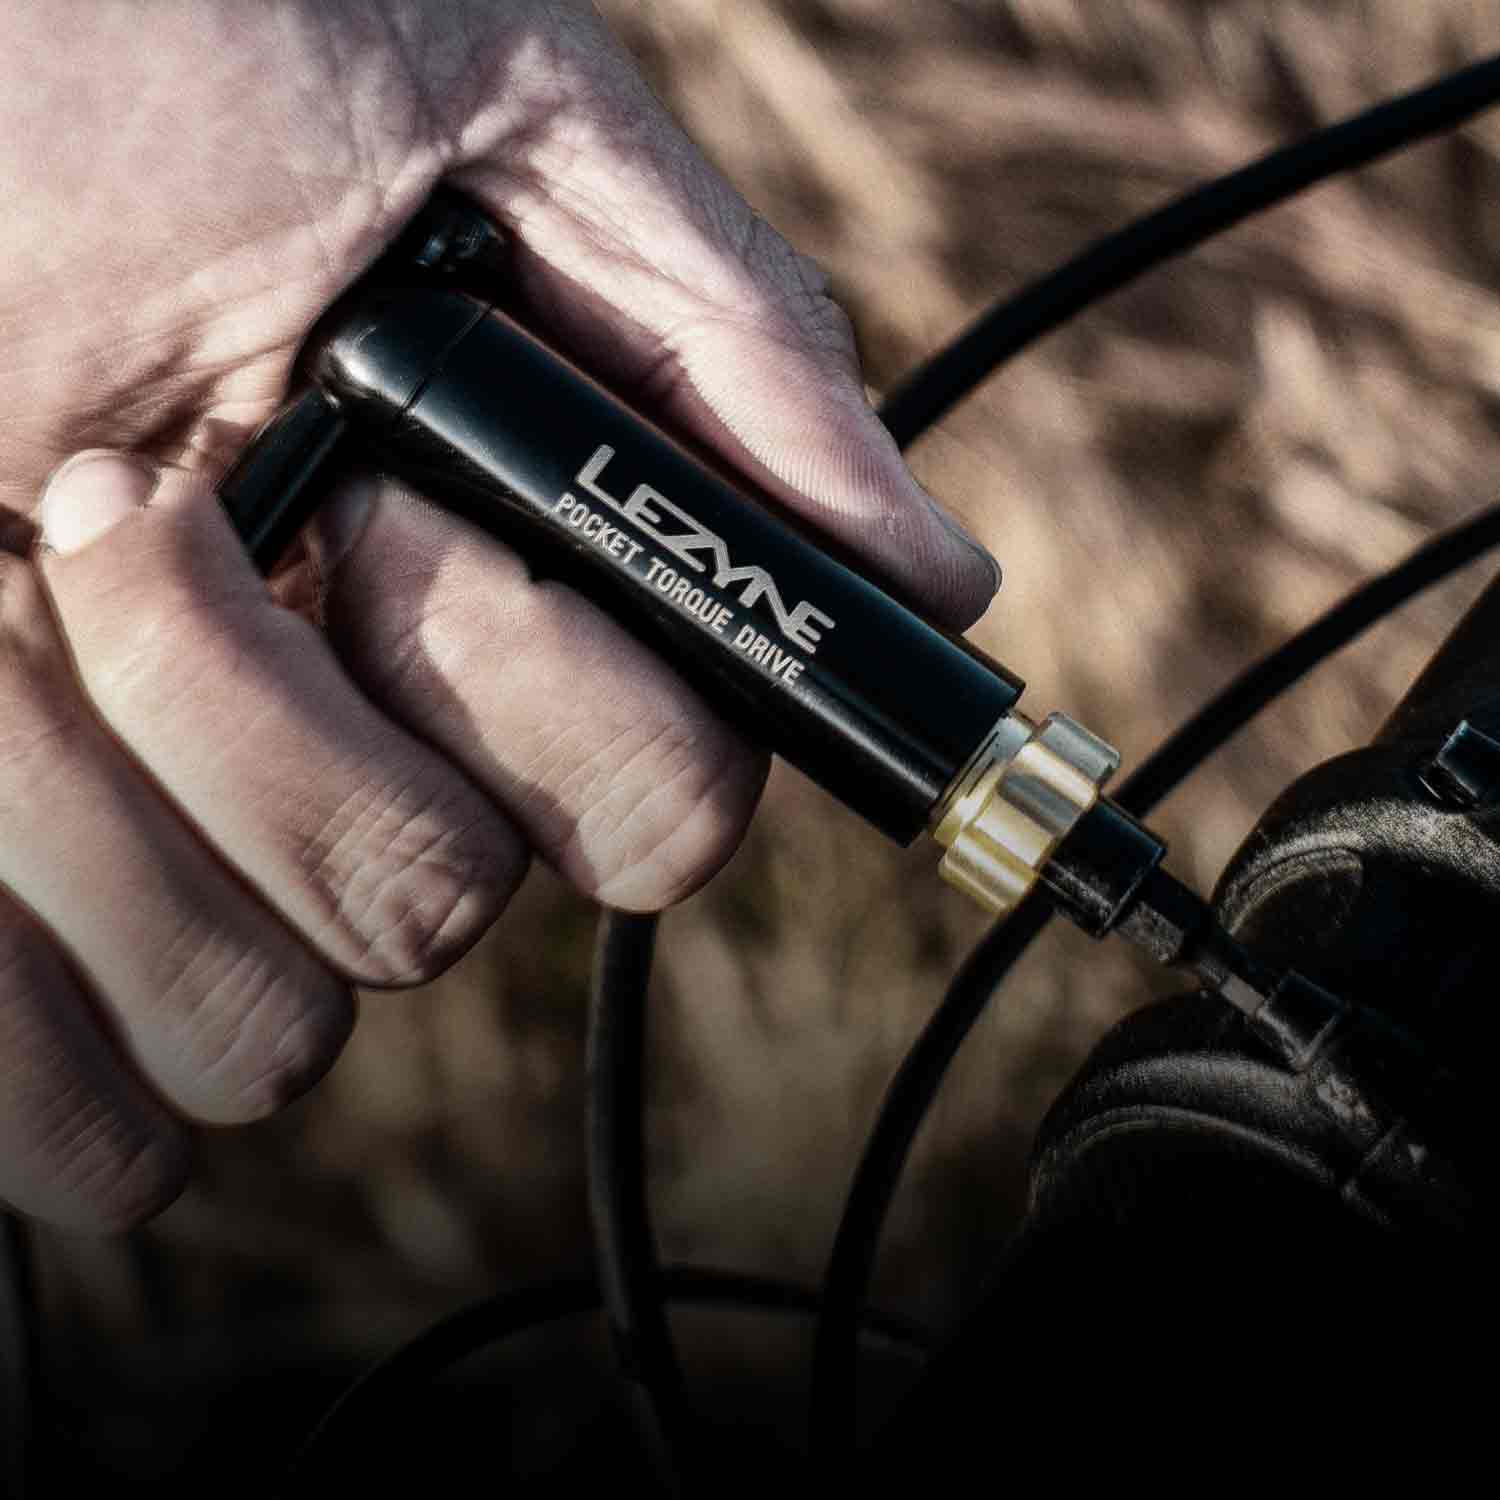 A hand holding a tool with Lezyne Pocket Torque Drive printed on it.